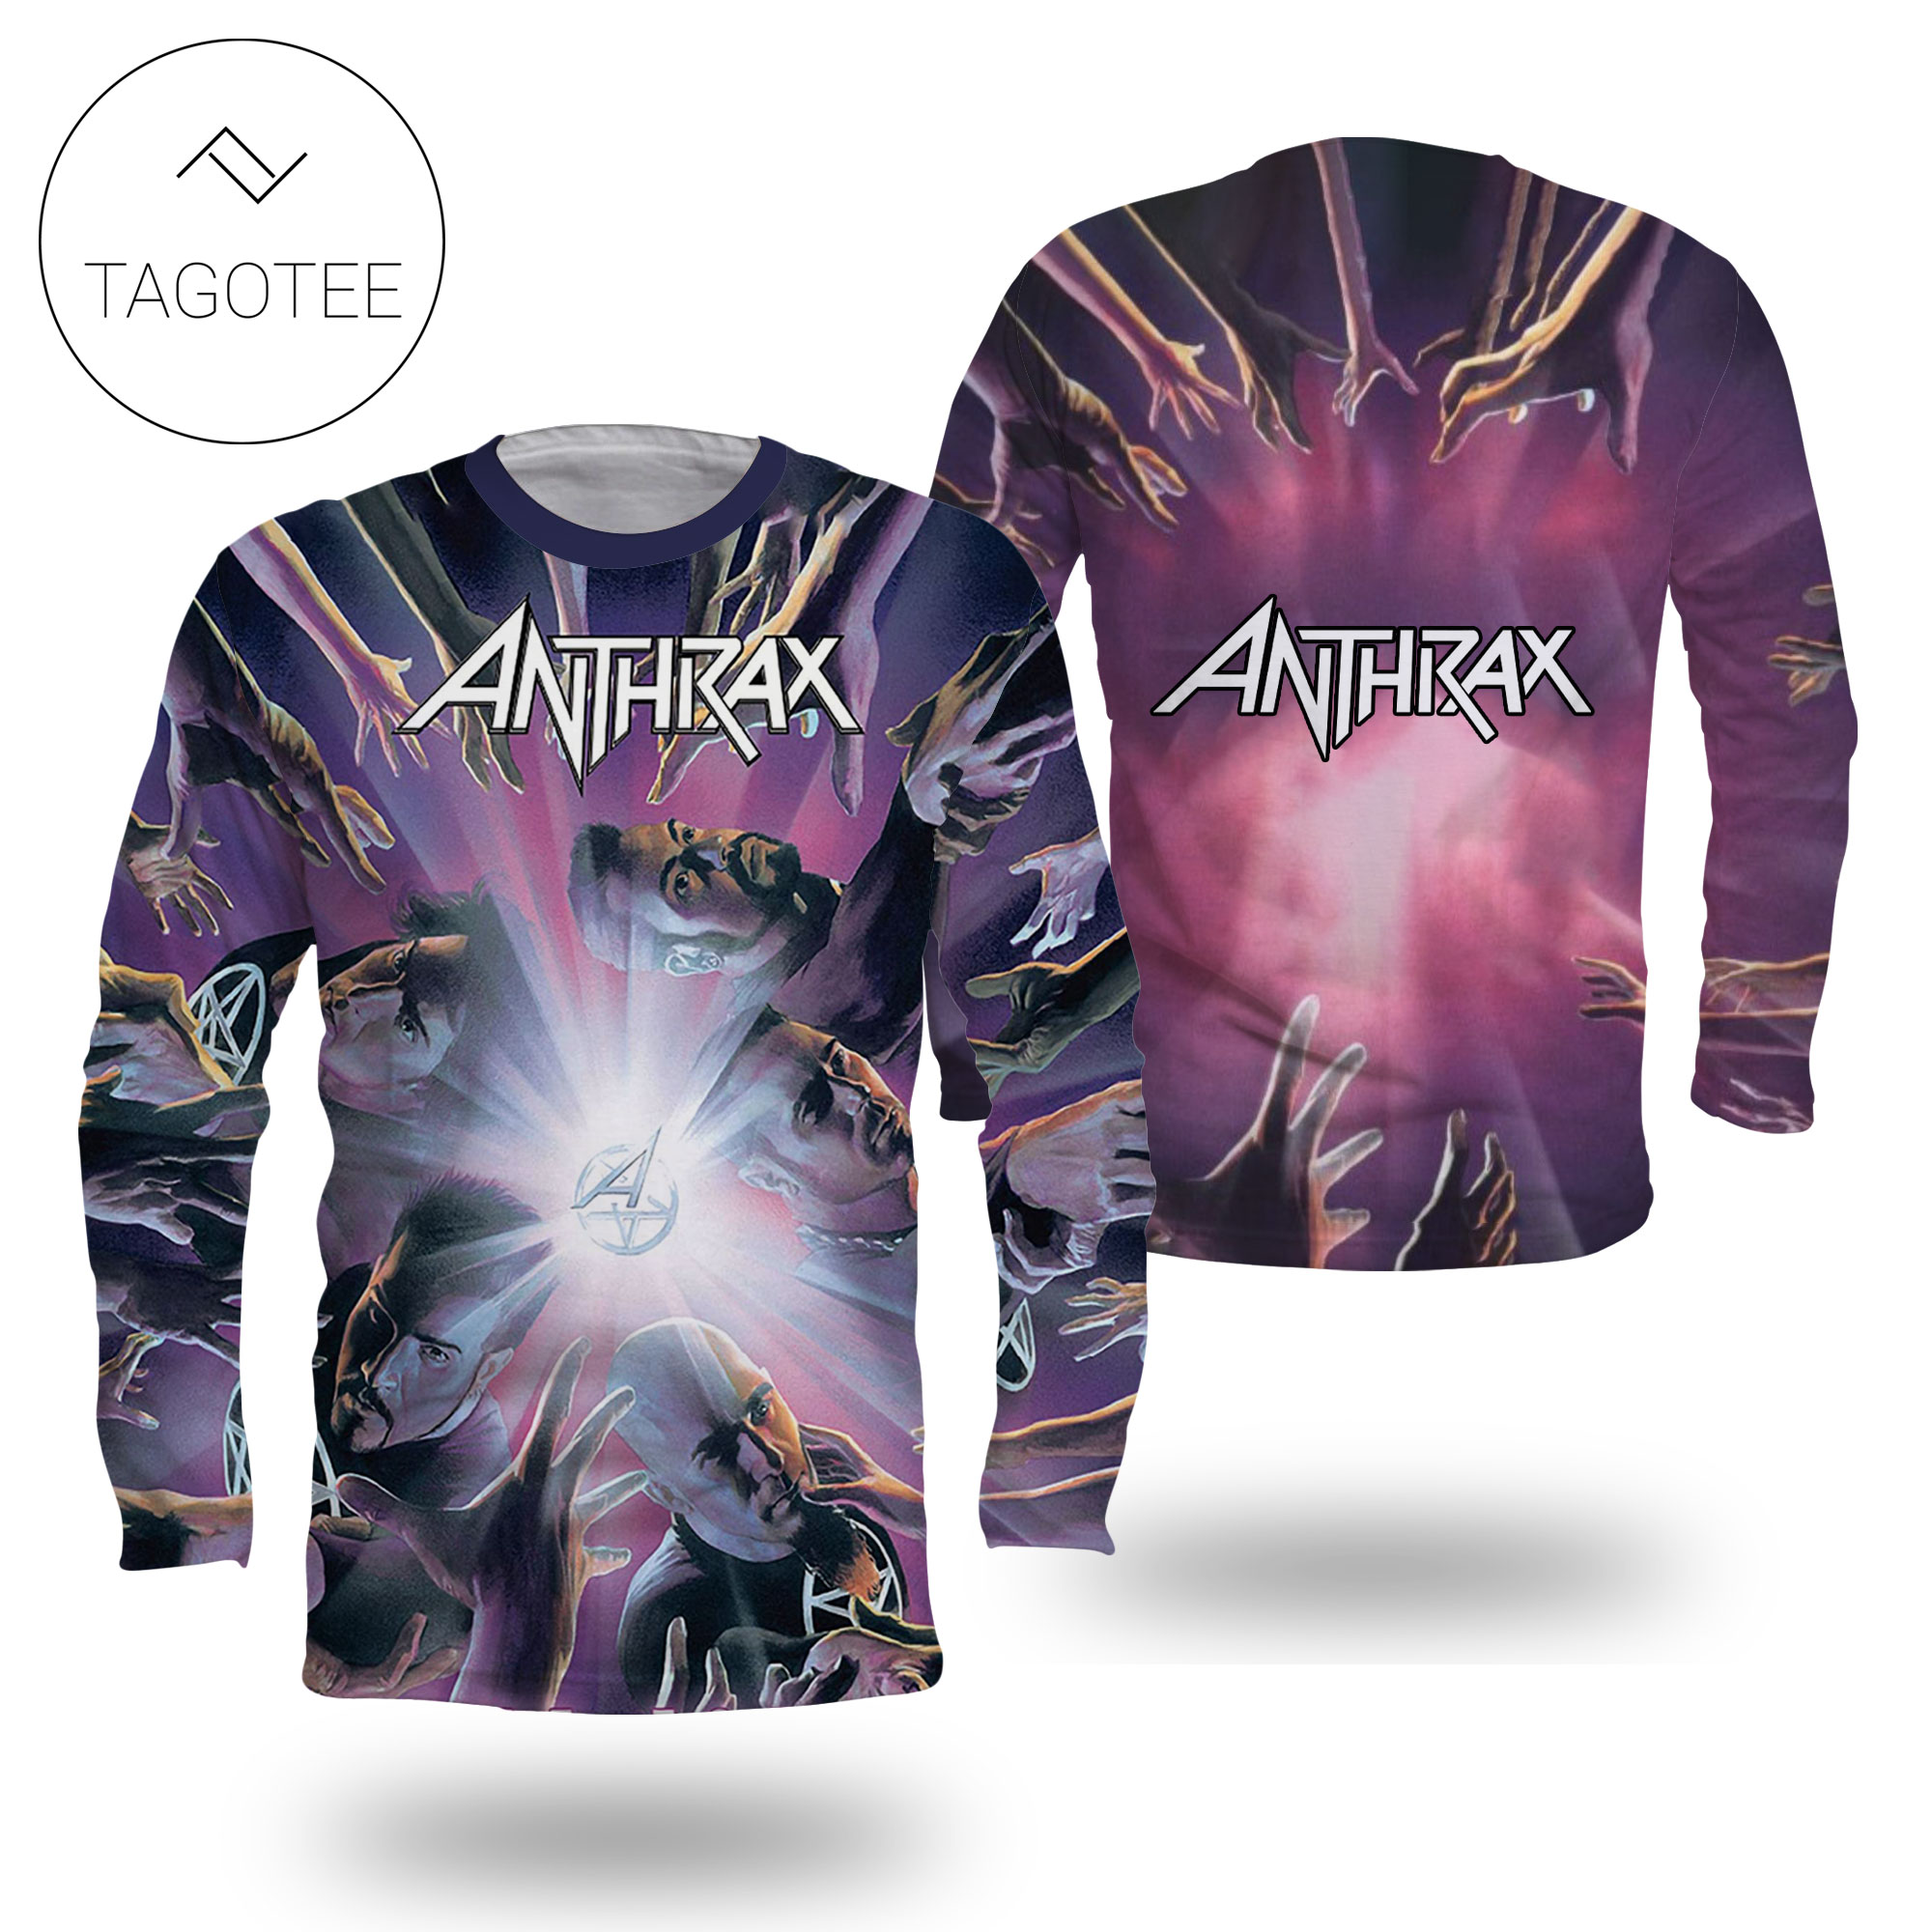 Anthrax We've Come For You All Album Cover Shirt - EmonShop